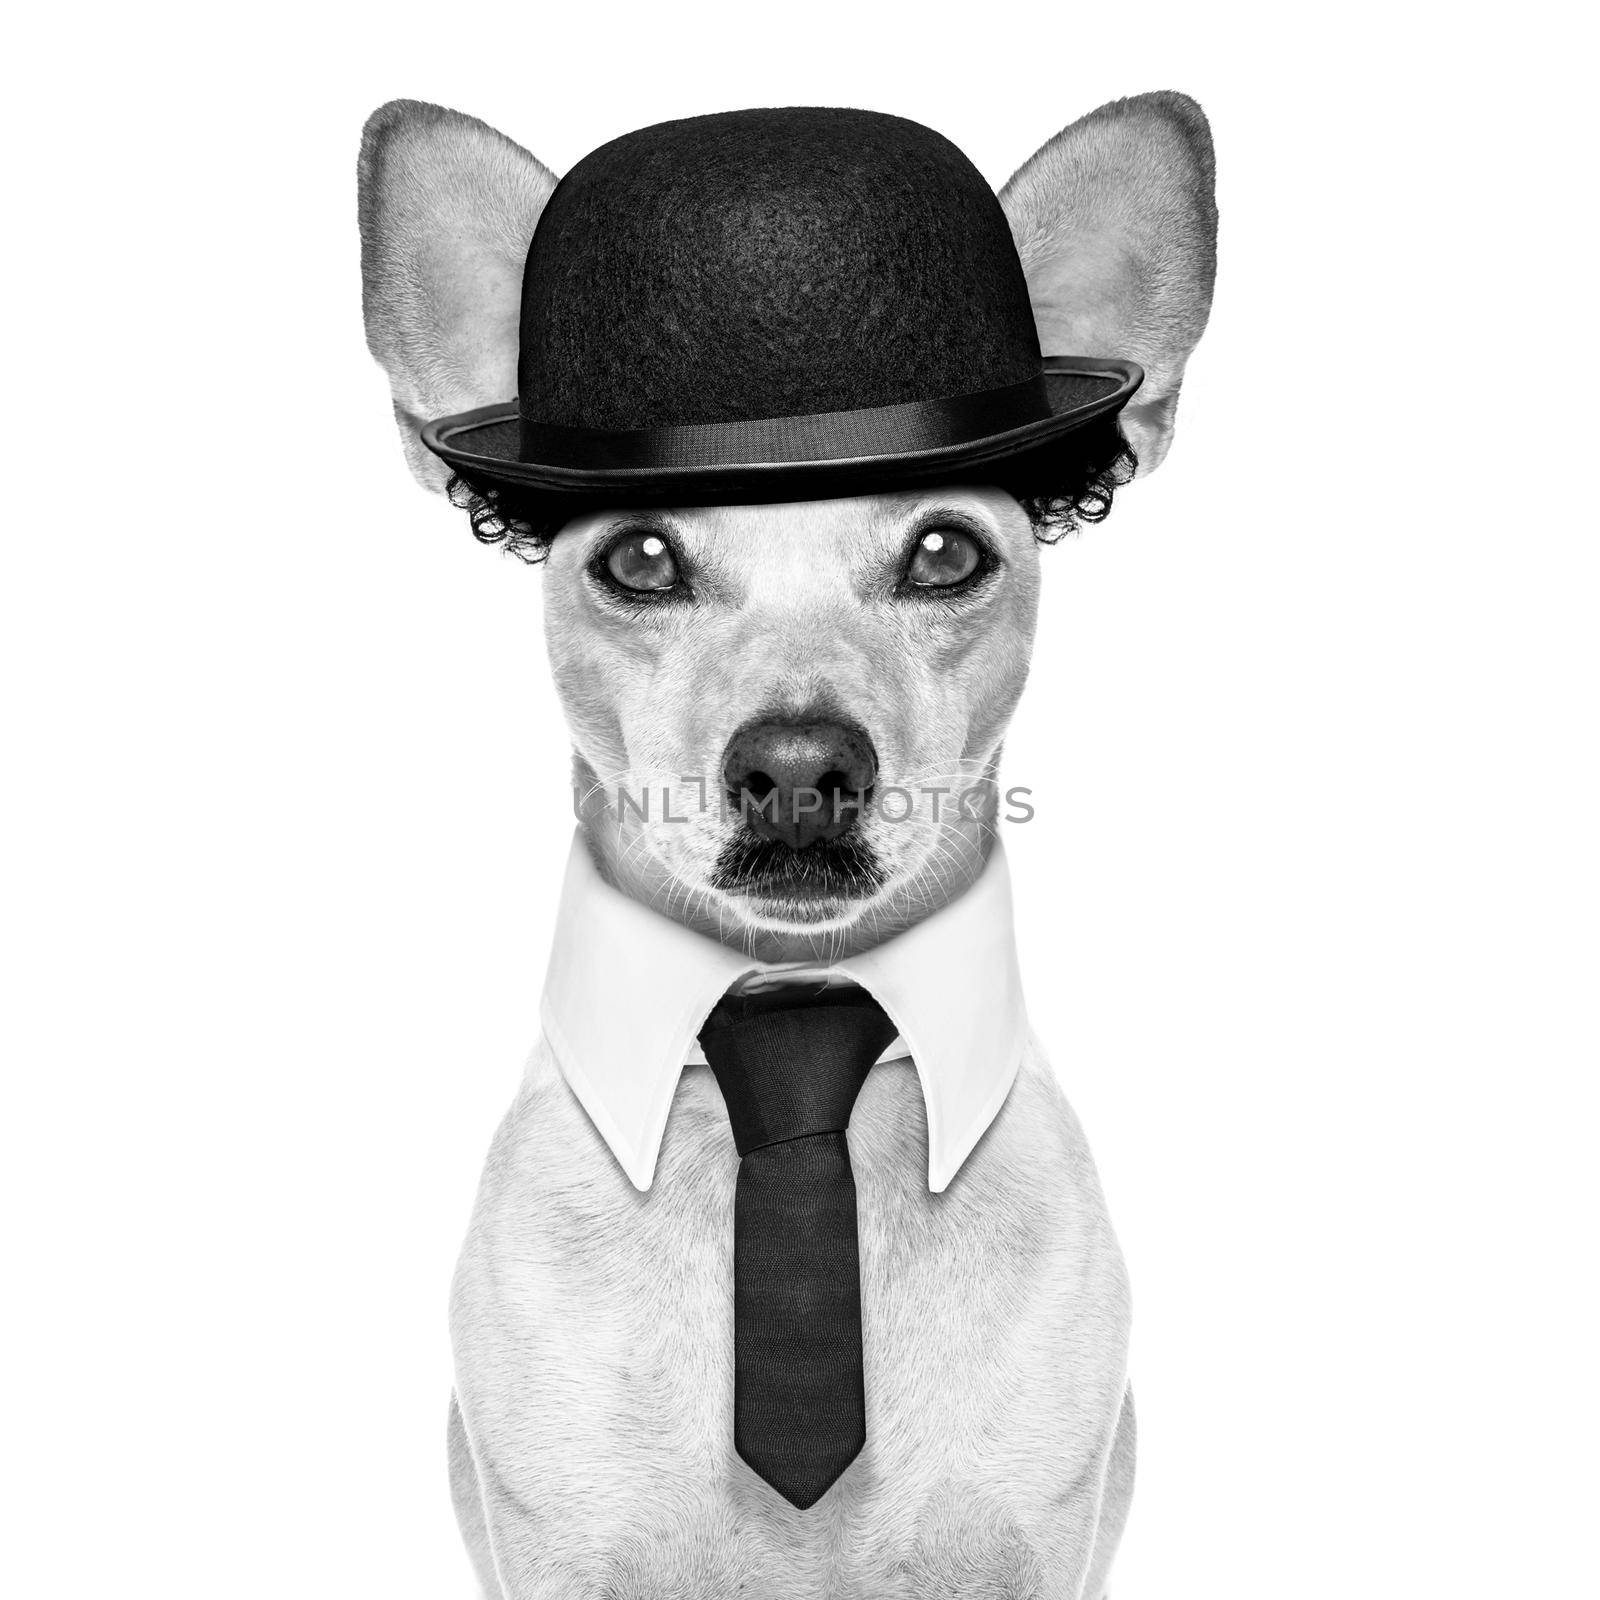 comedian classic dog terrier, wearing a bowler hat ,black tie and mustache, isolated on white background in black and white retro look